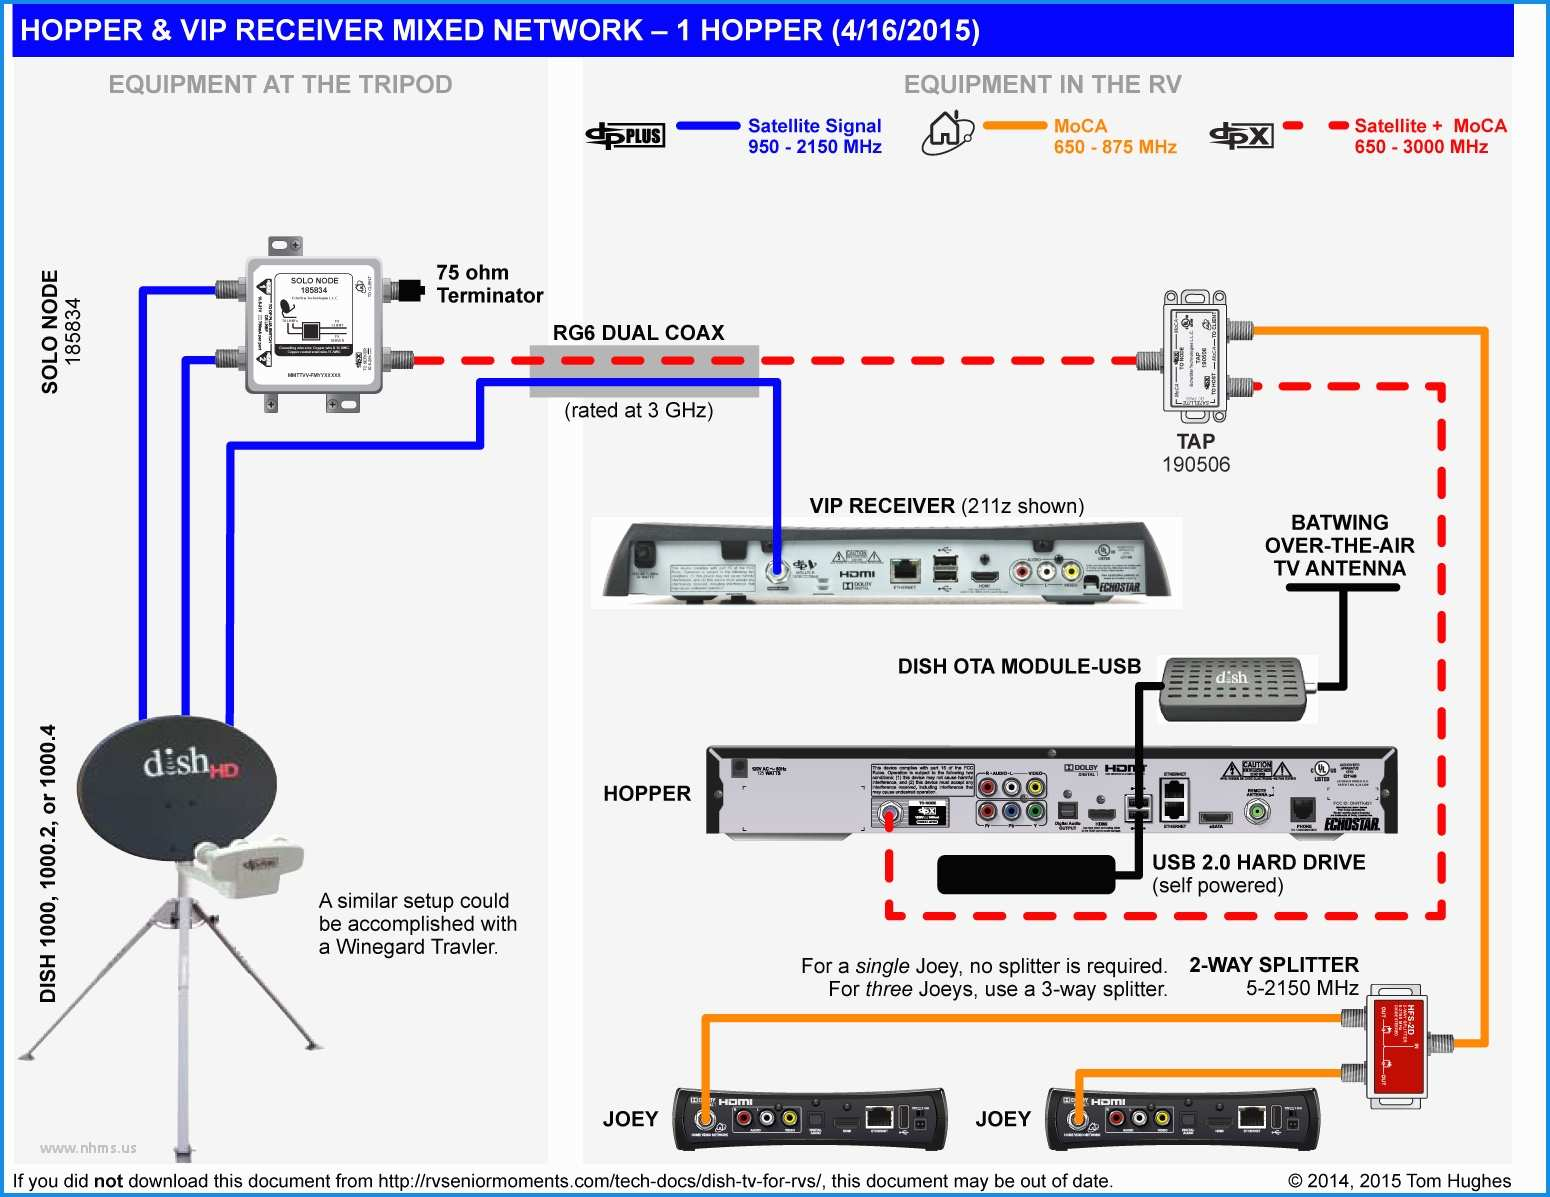 Dishtv Wiring Diagram - Wiring Diagram Data Oreo - How To Connect 2 Tvs To One Dish Network Receiver Wiring Diagram